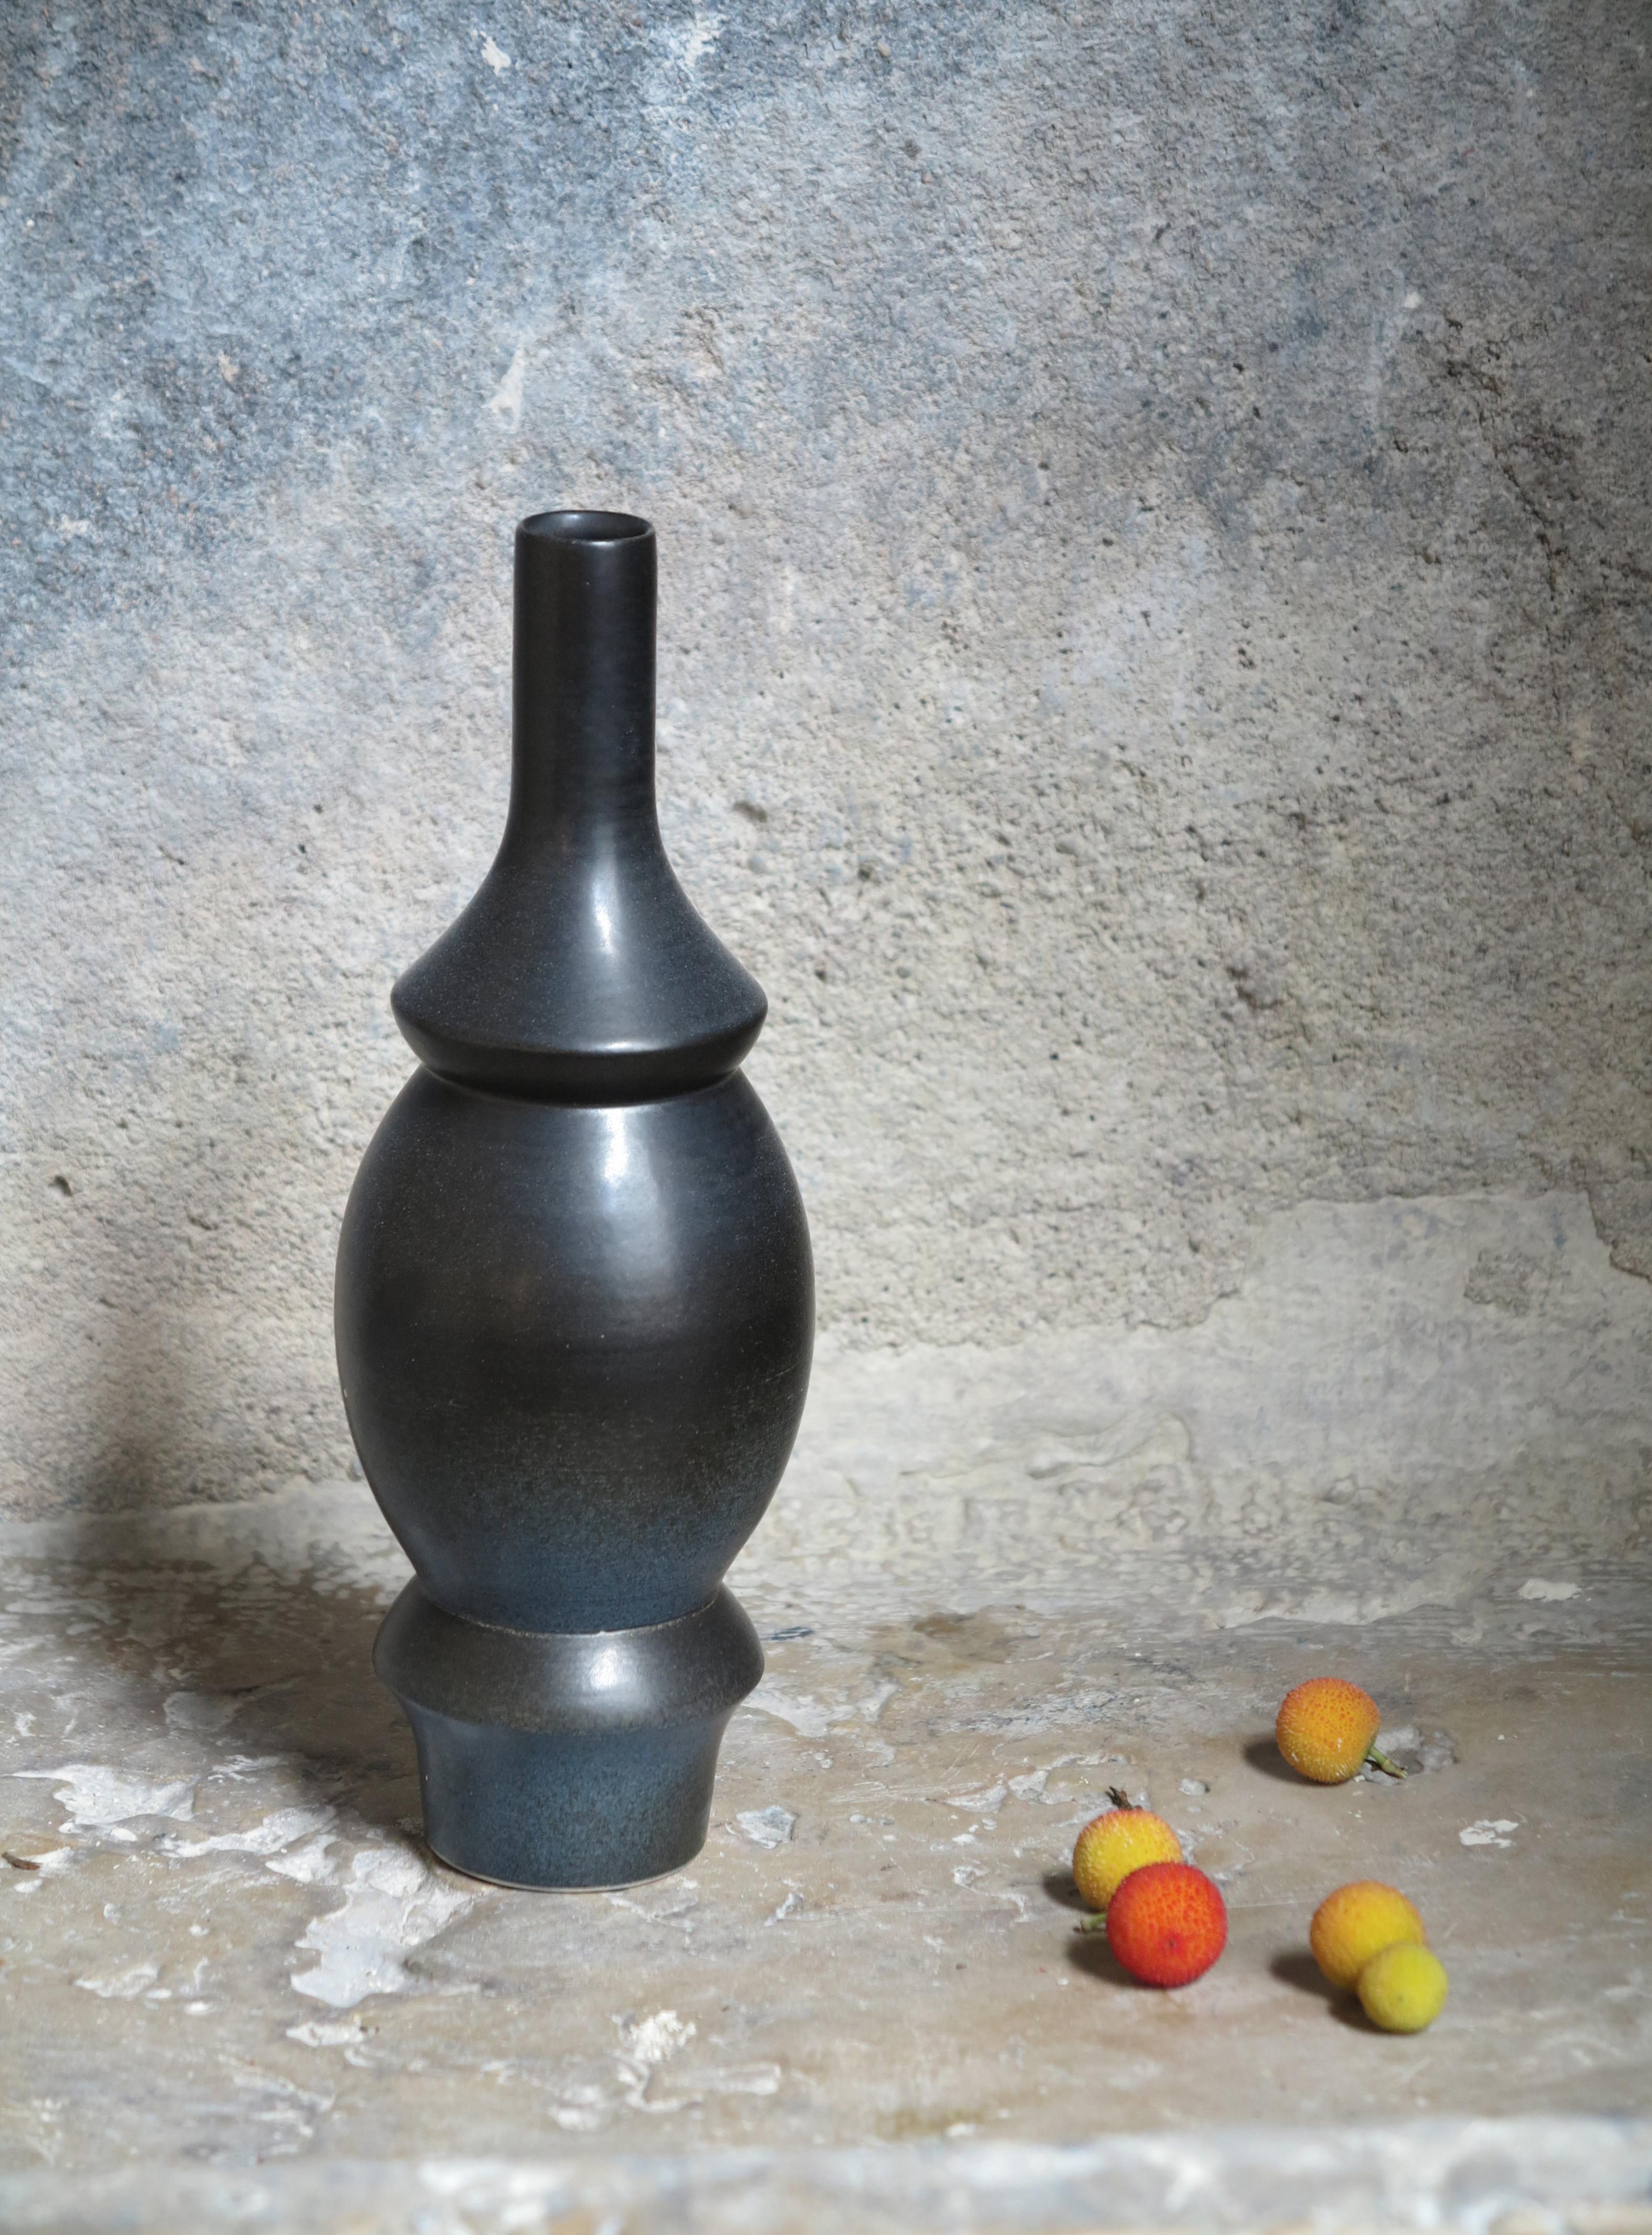 Stoneware vase corps by Cica Gomez
Dimensions: Ø 7.5 x H 23 cm
Materials: Stoneware

Usual objects. My work is first driven by the search for the line. The one that it draw when the object takes shape and place in space. That which delimits a